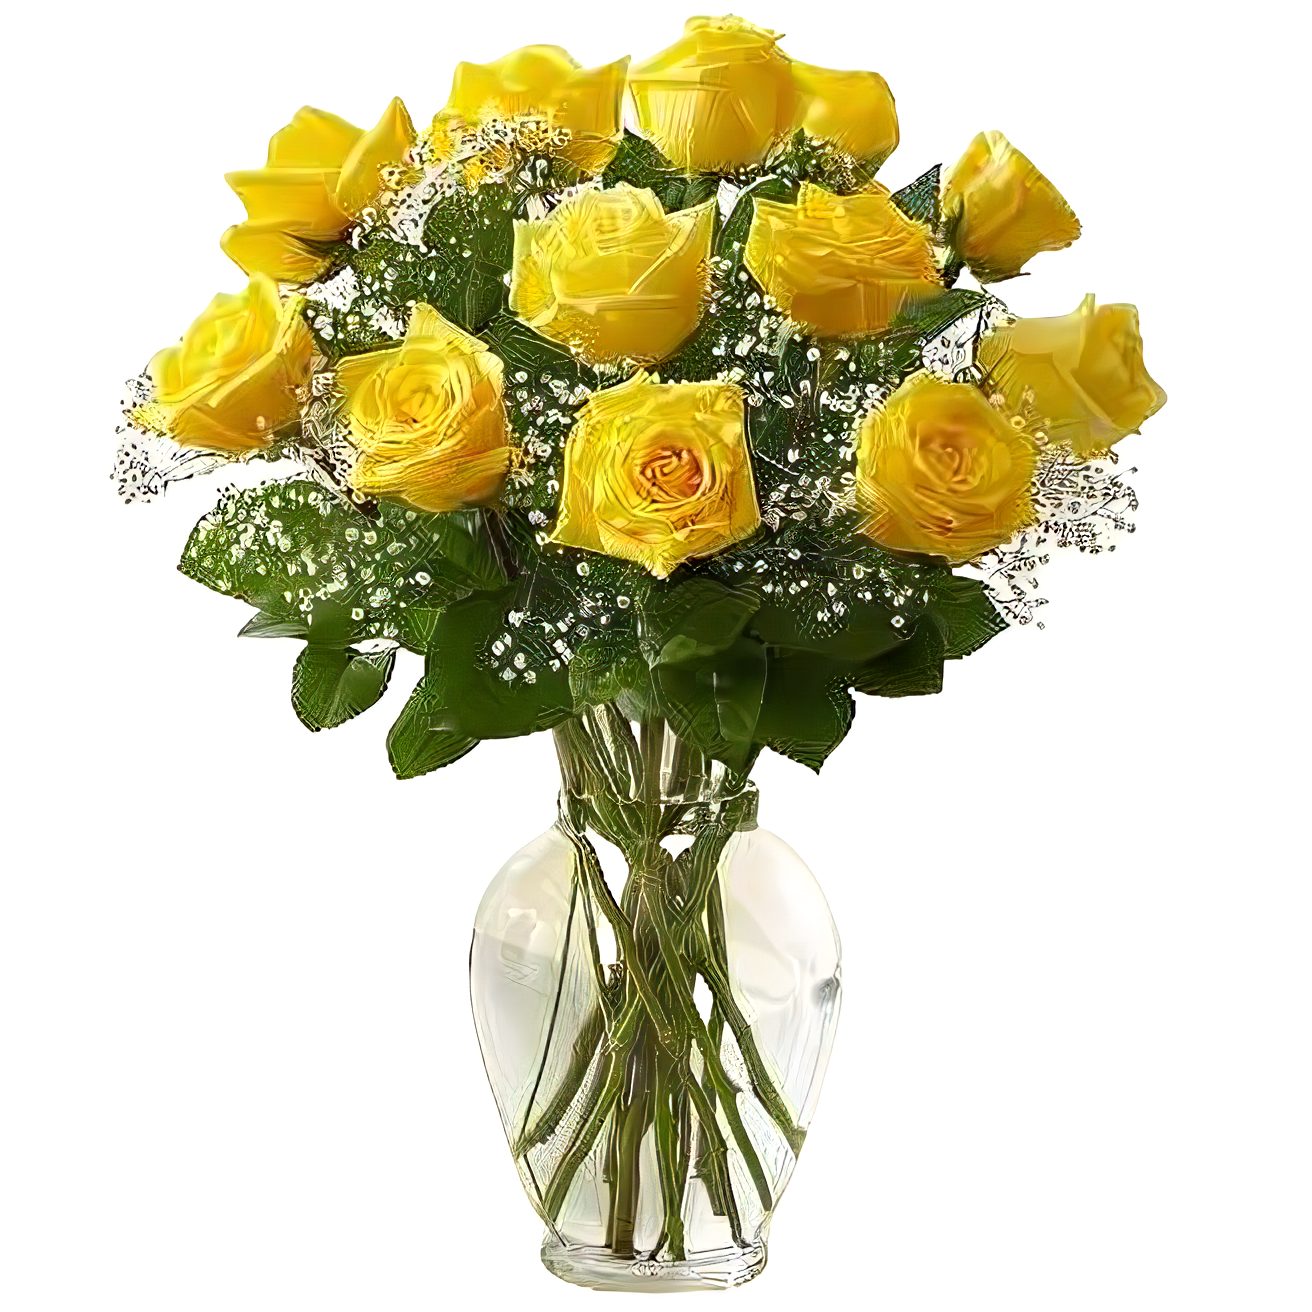 NYC Flower Delivery - Premium Long Stem Yellow Roses - Roses